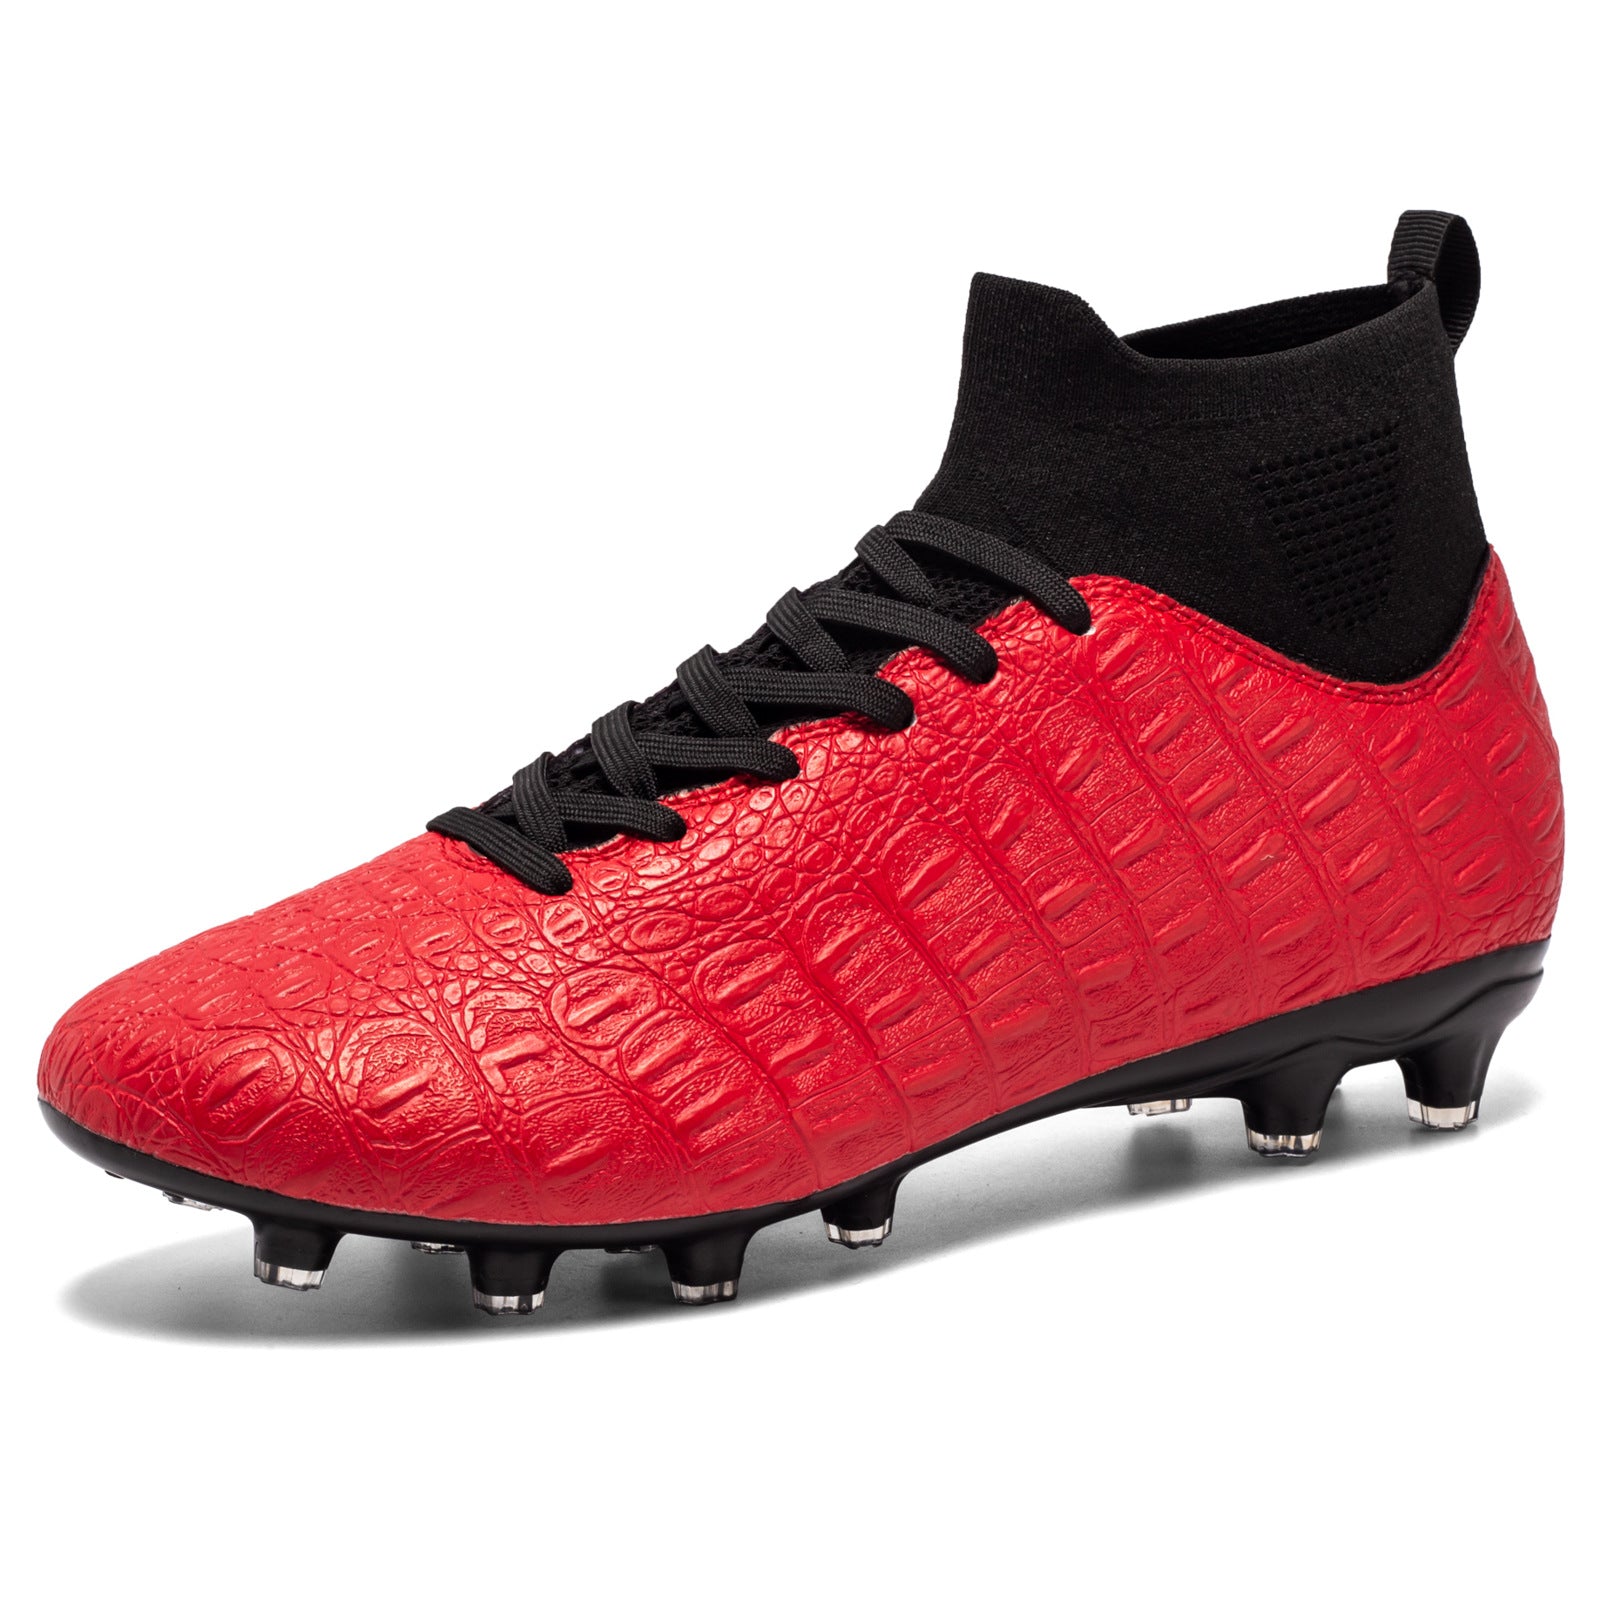 Score Big: Premium Soccer Shoes for Victory